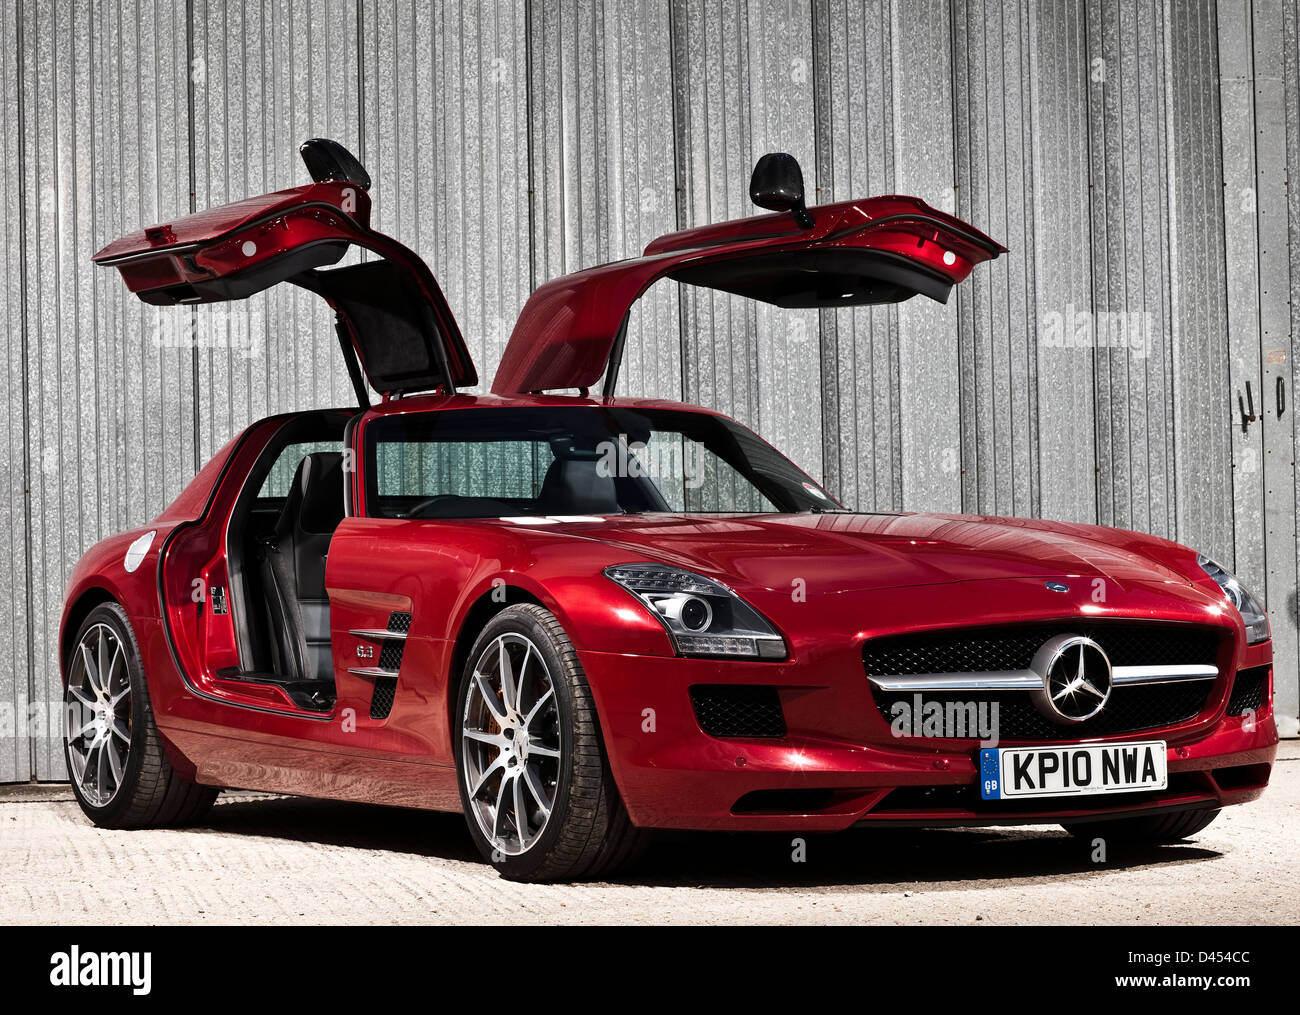 Red Mercedes Benz SLS AMG luxury car with wing doors, Winchester, UK, 03 09 2010 Stock Photo